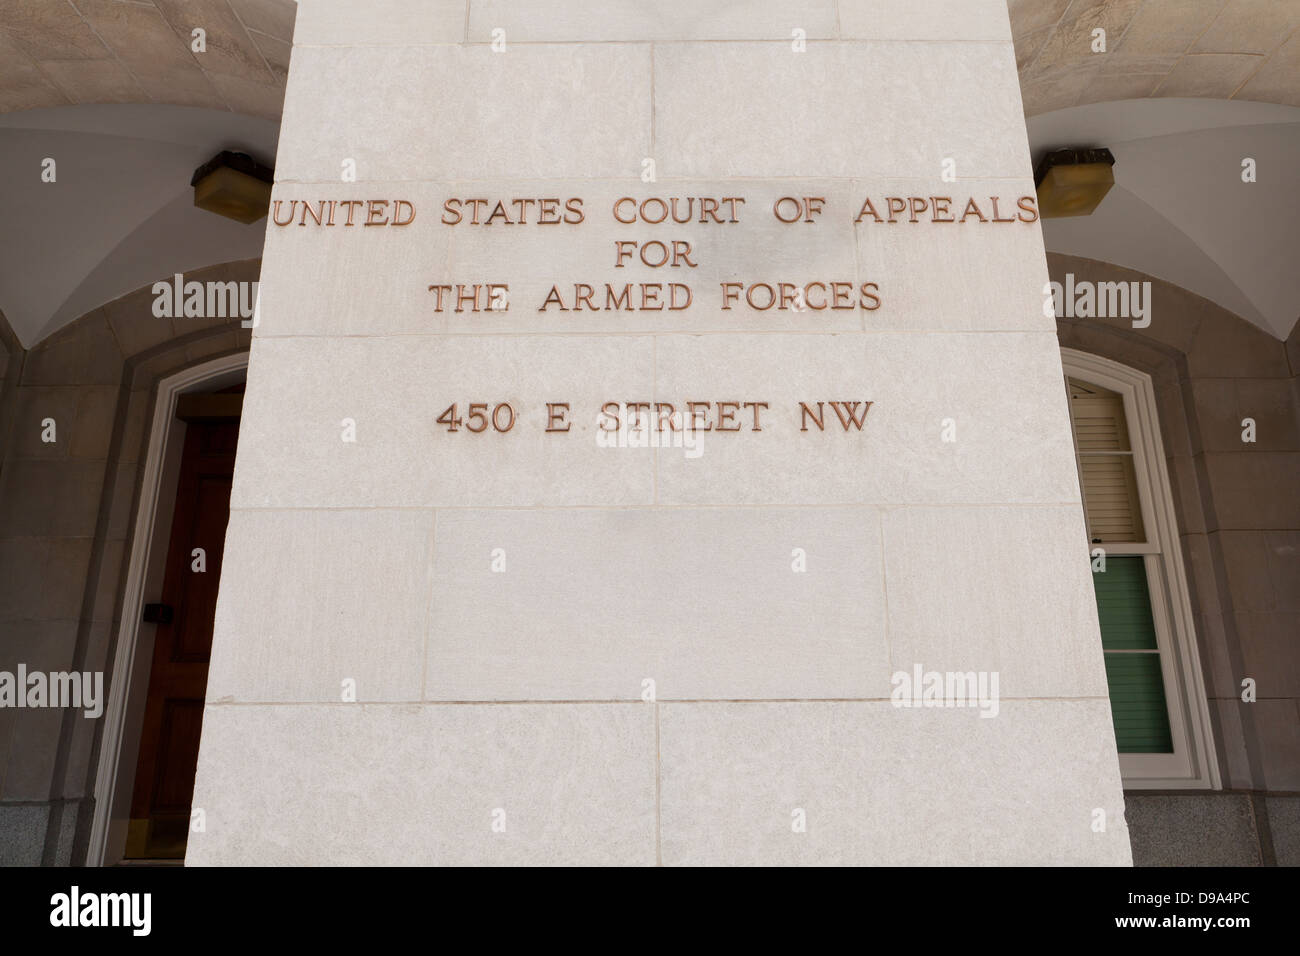 US Court of Appeals for The Armed Forces building - Washington, DC USA Stock Photo